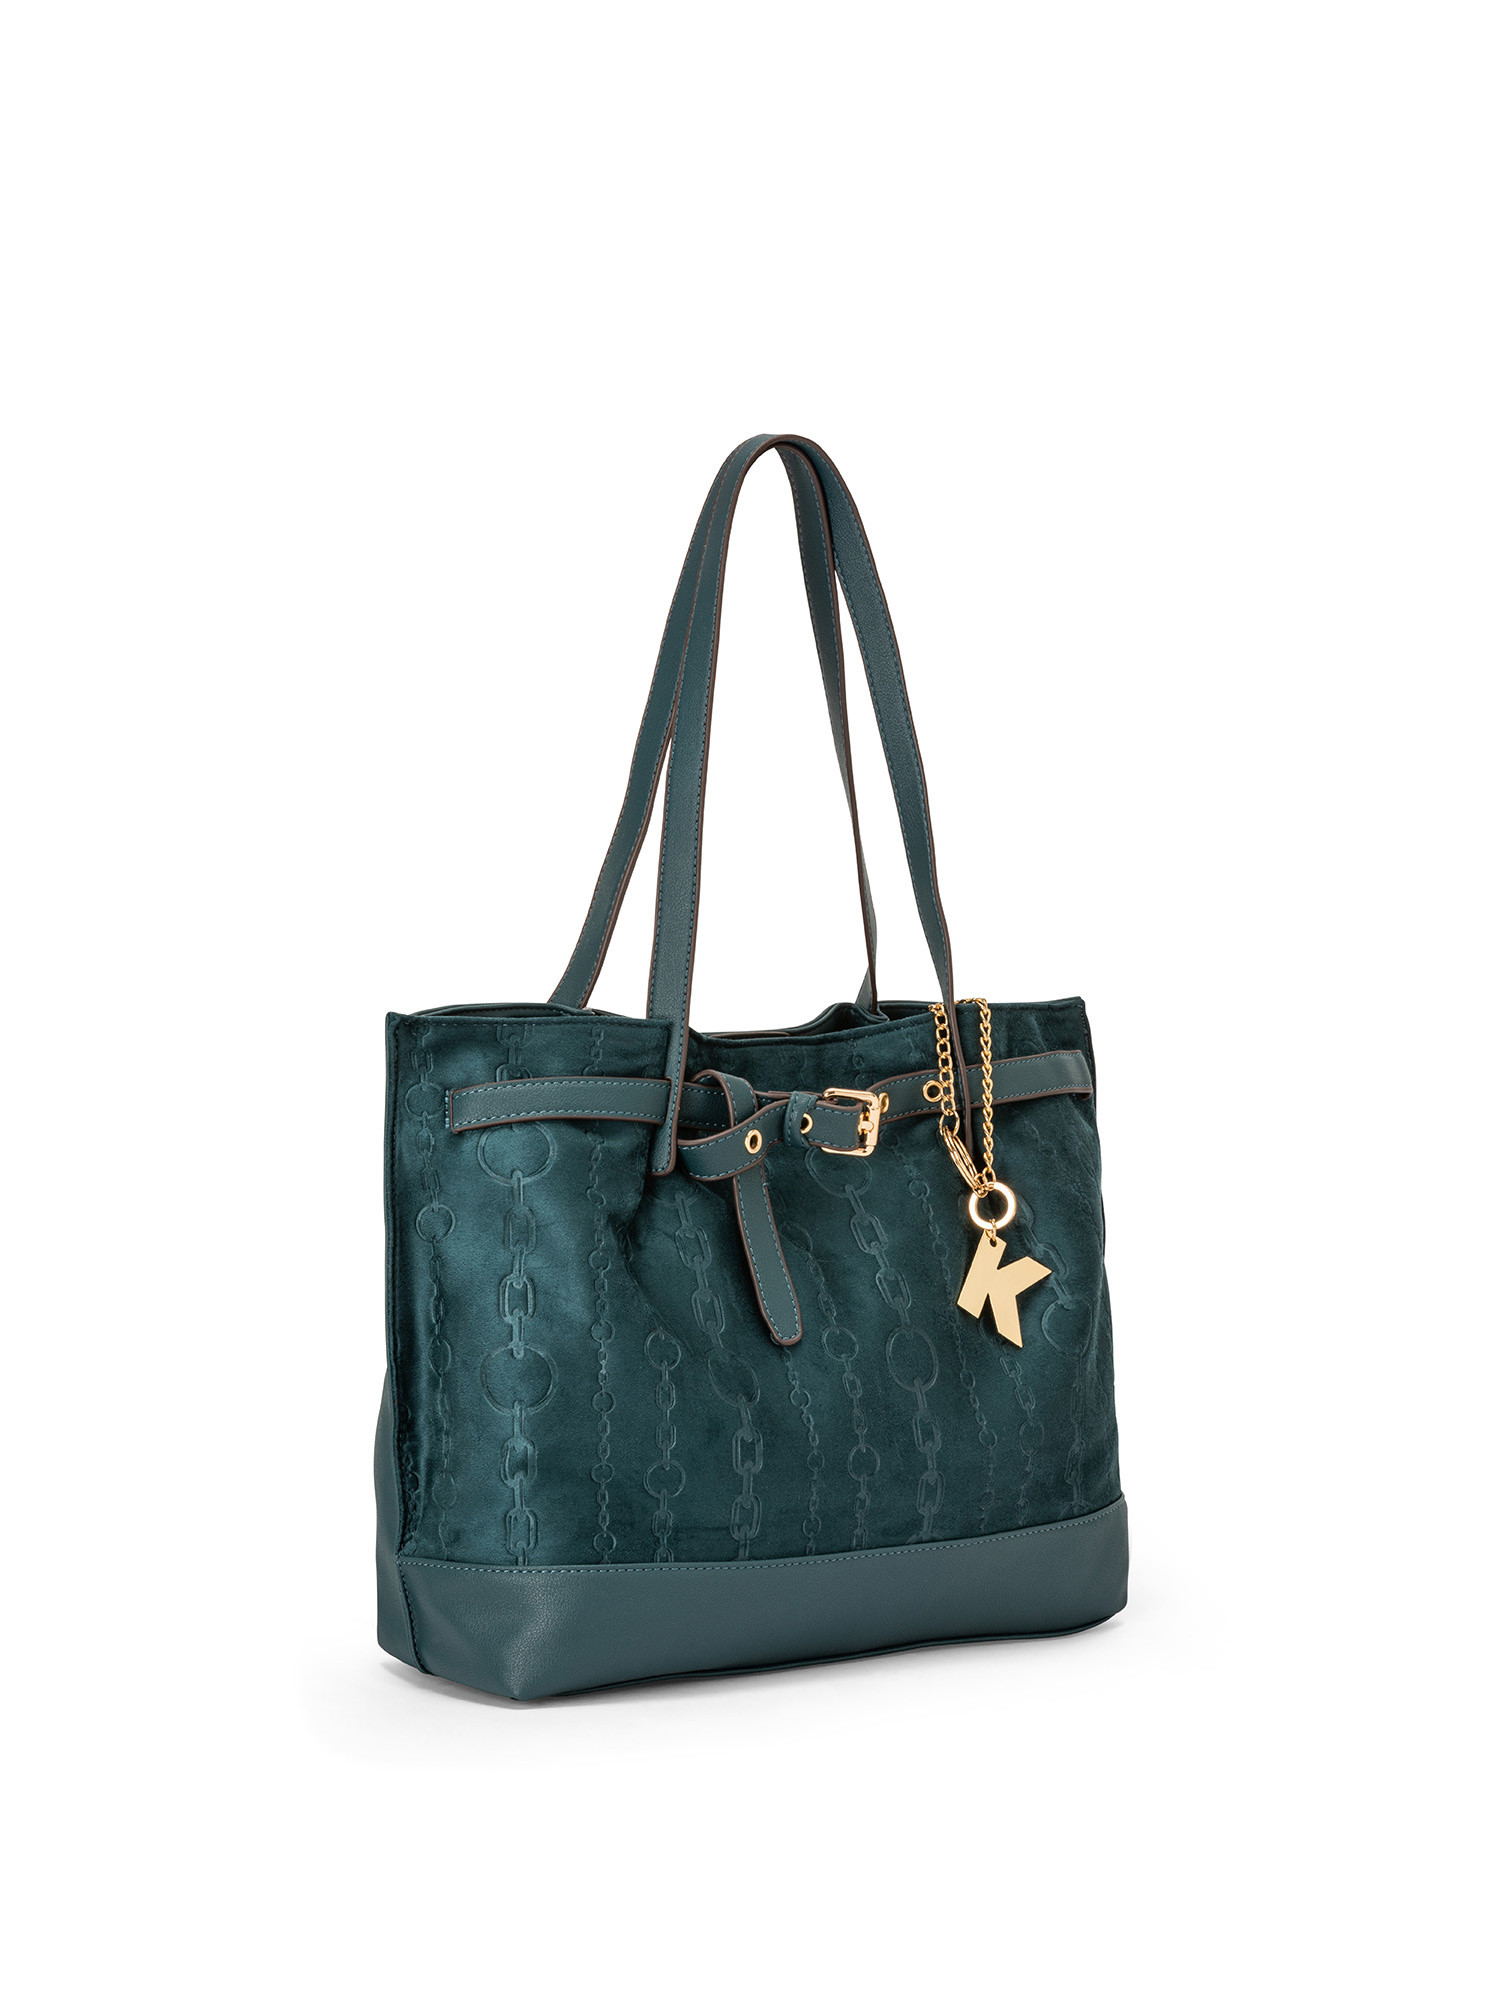 Koan - Shopping bag with print, Green teal, large image number 1